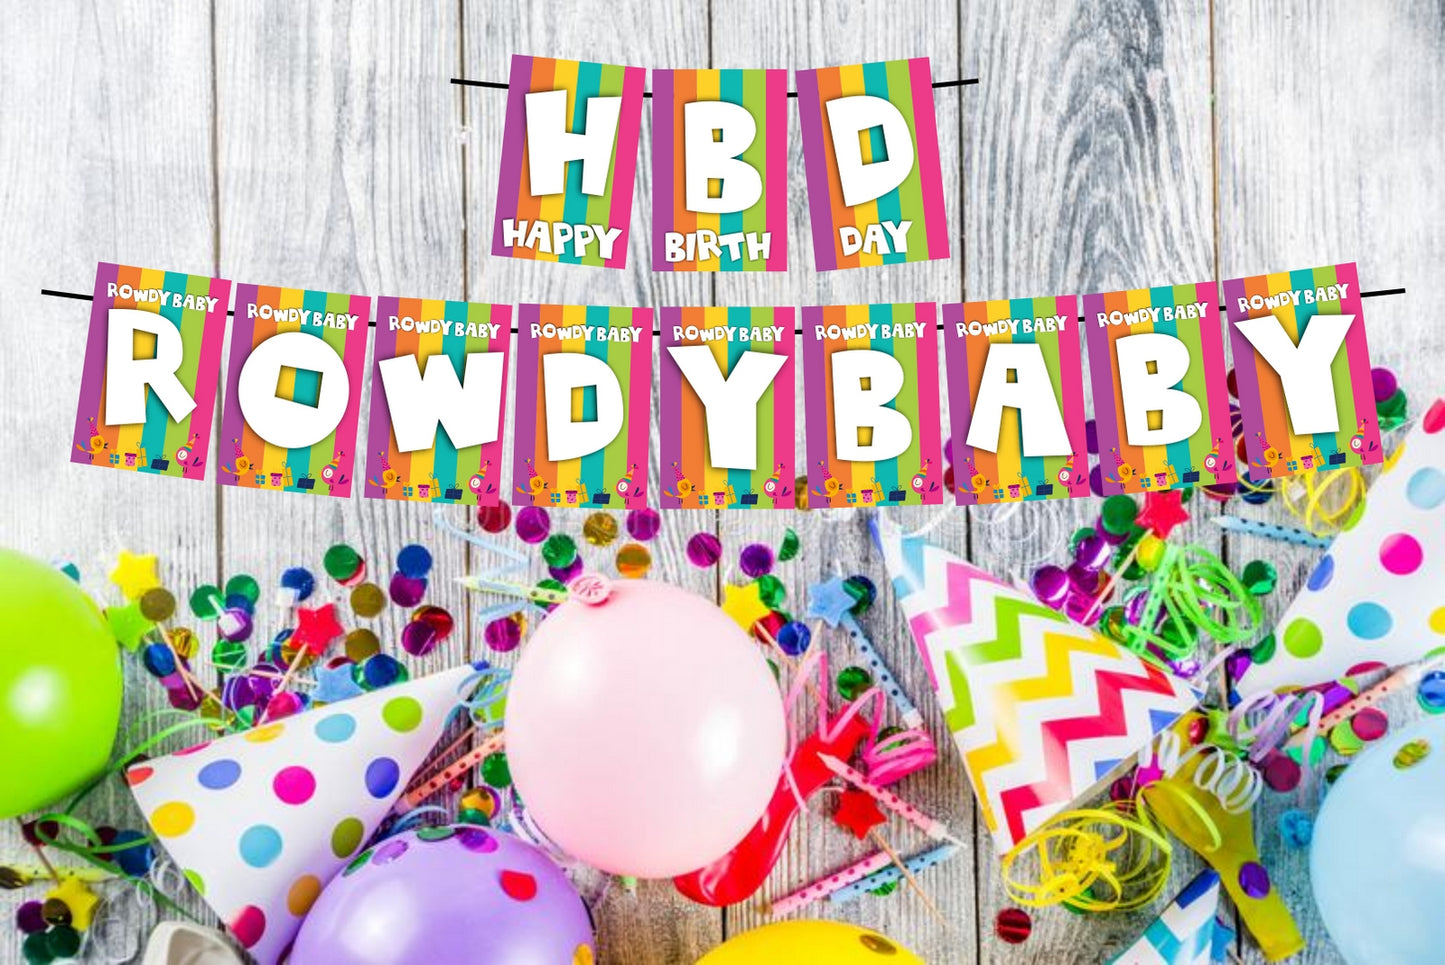 Happy Birthday Rowdy Baby Birthday Decoration Hanging and Banner for Photo Shoot Backdrop and Theme Party